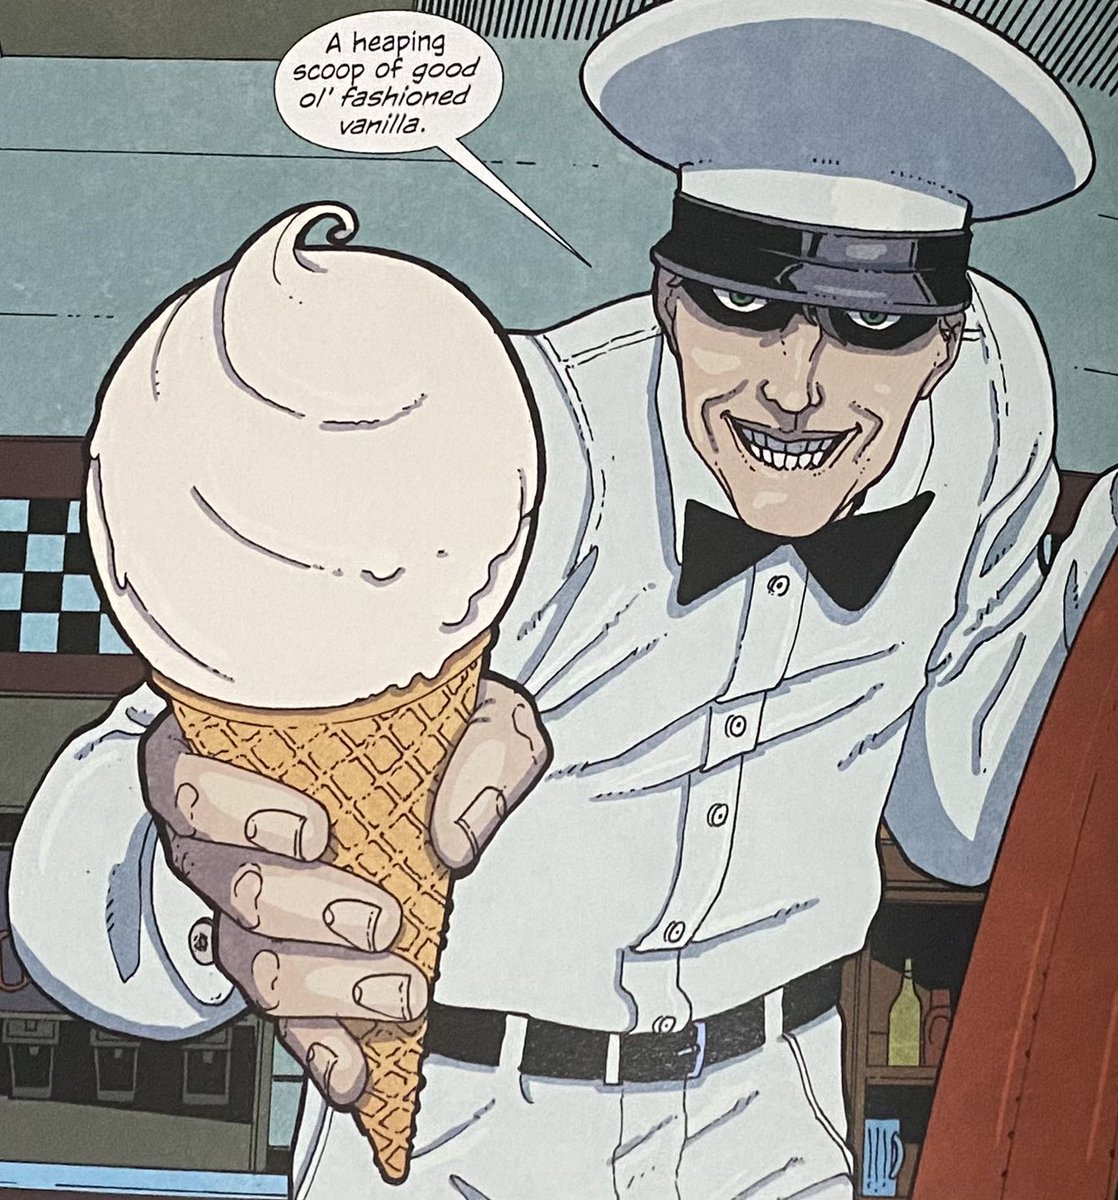 The latest addition to the collection is #WMaxwellPrince, @martinmorazzo & @ChrisOHalloran’s #IceCreamMan: Sundae Edition from @ImageComics. I’ve heard great things about this, I can’t wait to check it out! 🍦